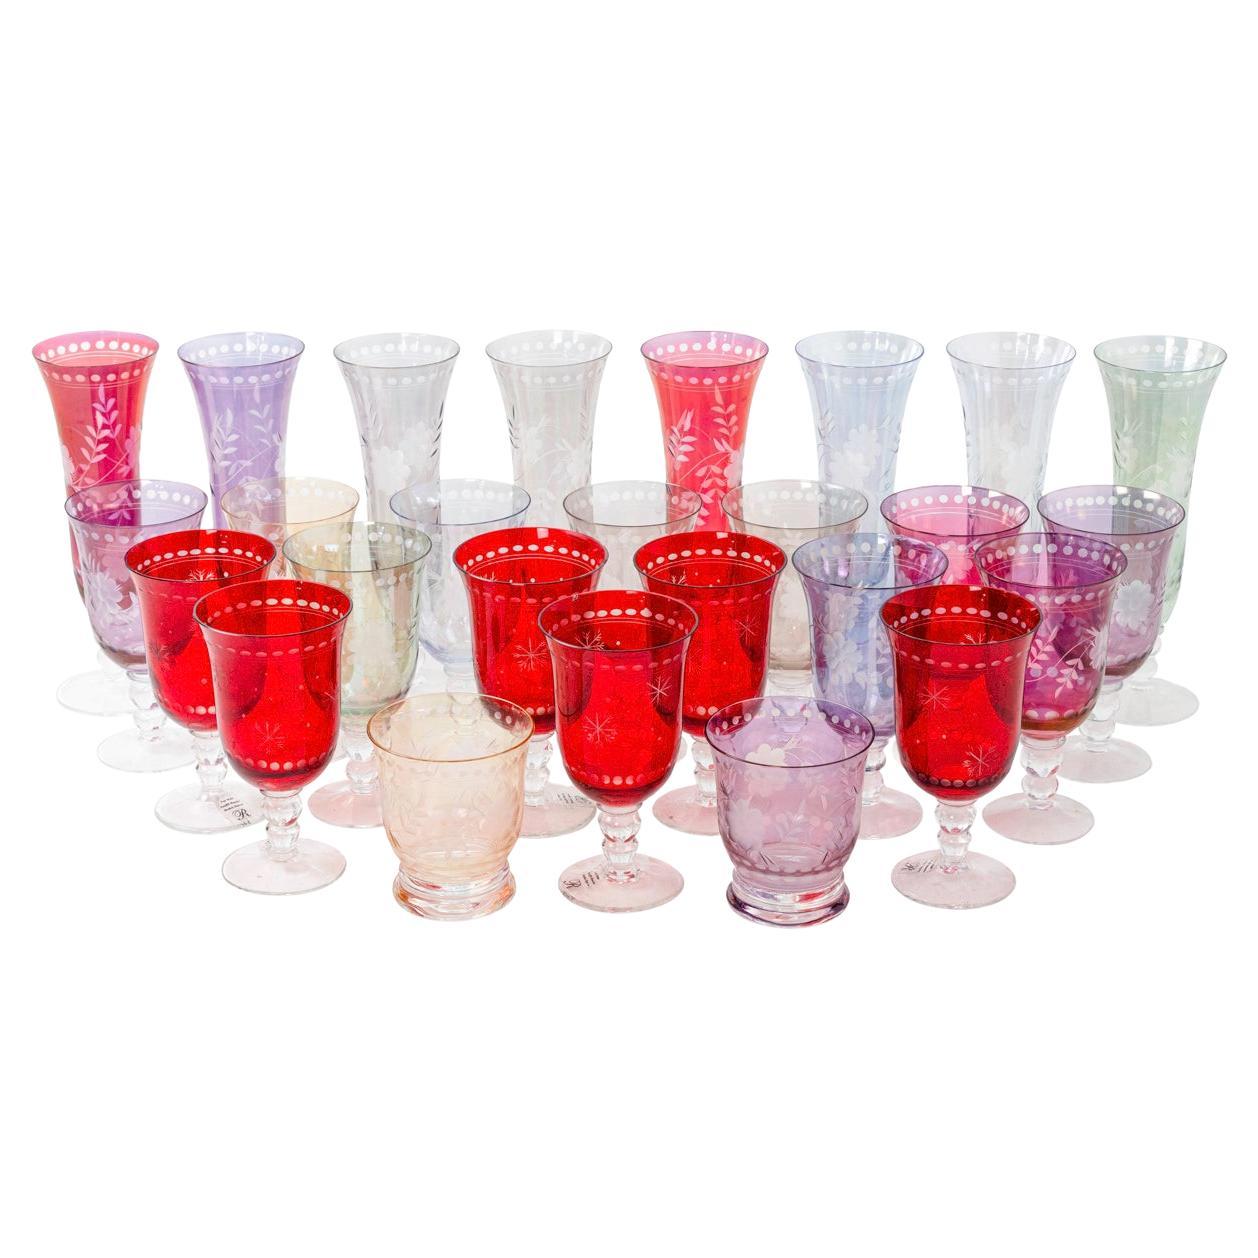 Bohemian crystal style glassware set, contemporary work